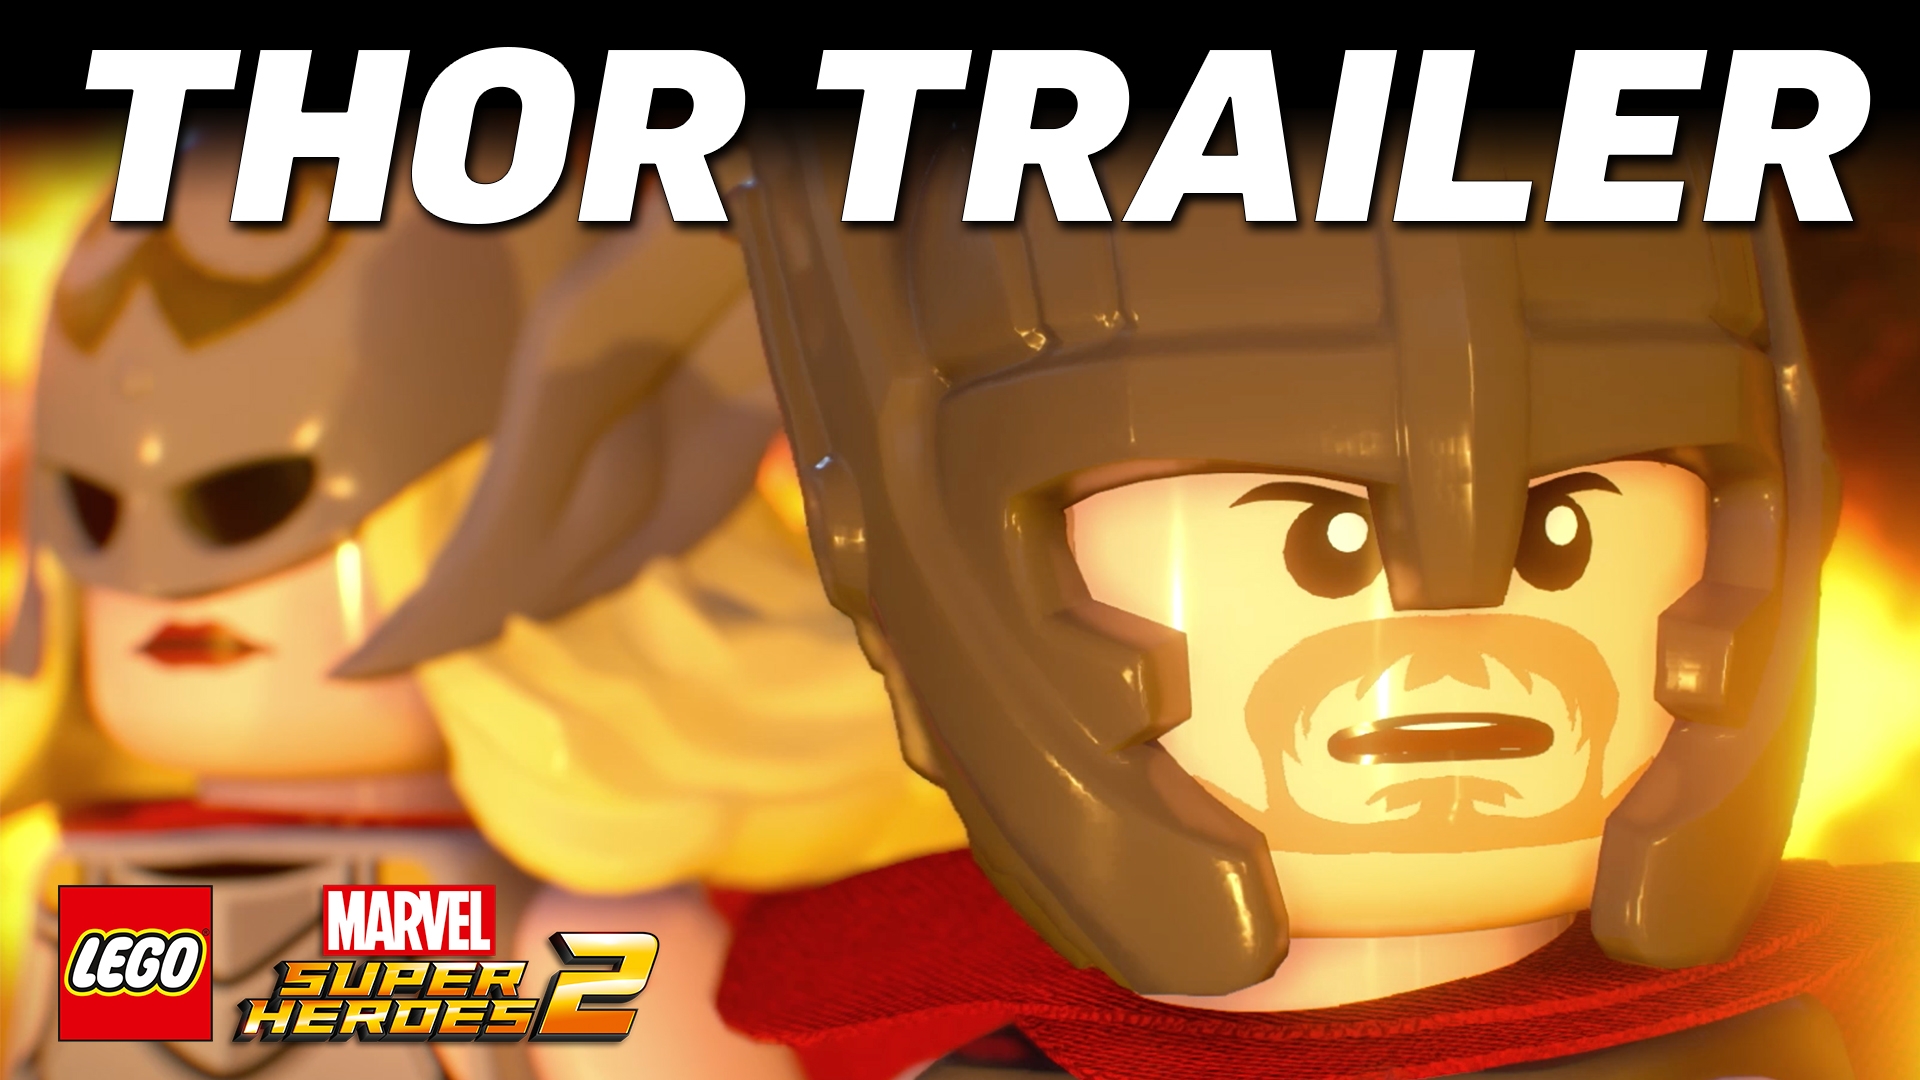 LEGO Marvel Avengers: Climate Conundrum – Episode 2: “Friends and Foes” 